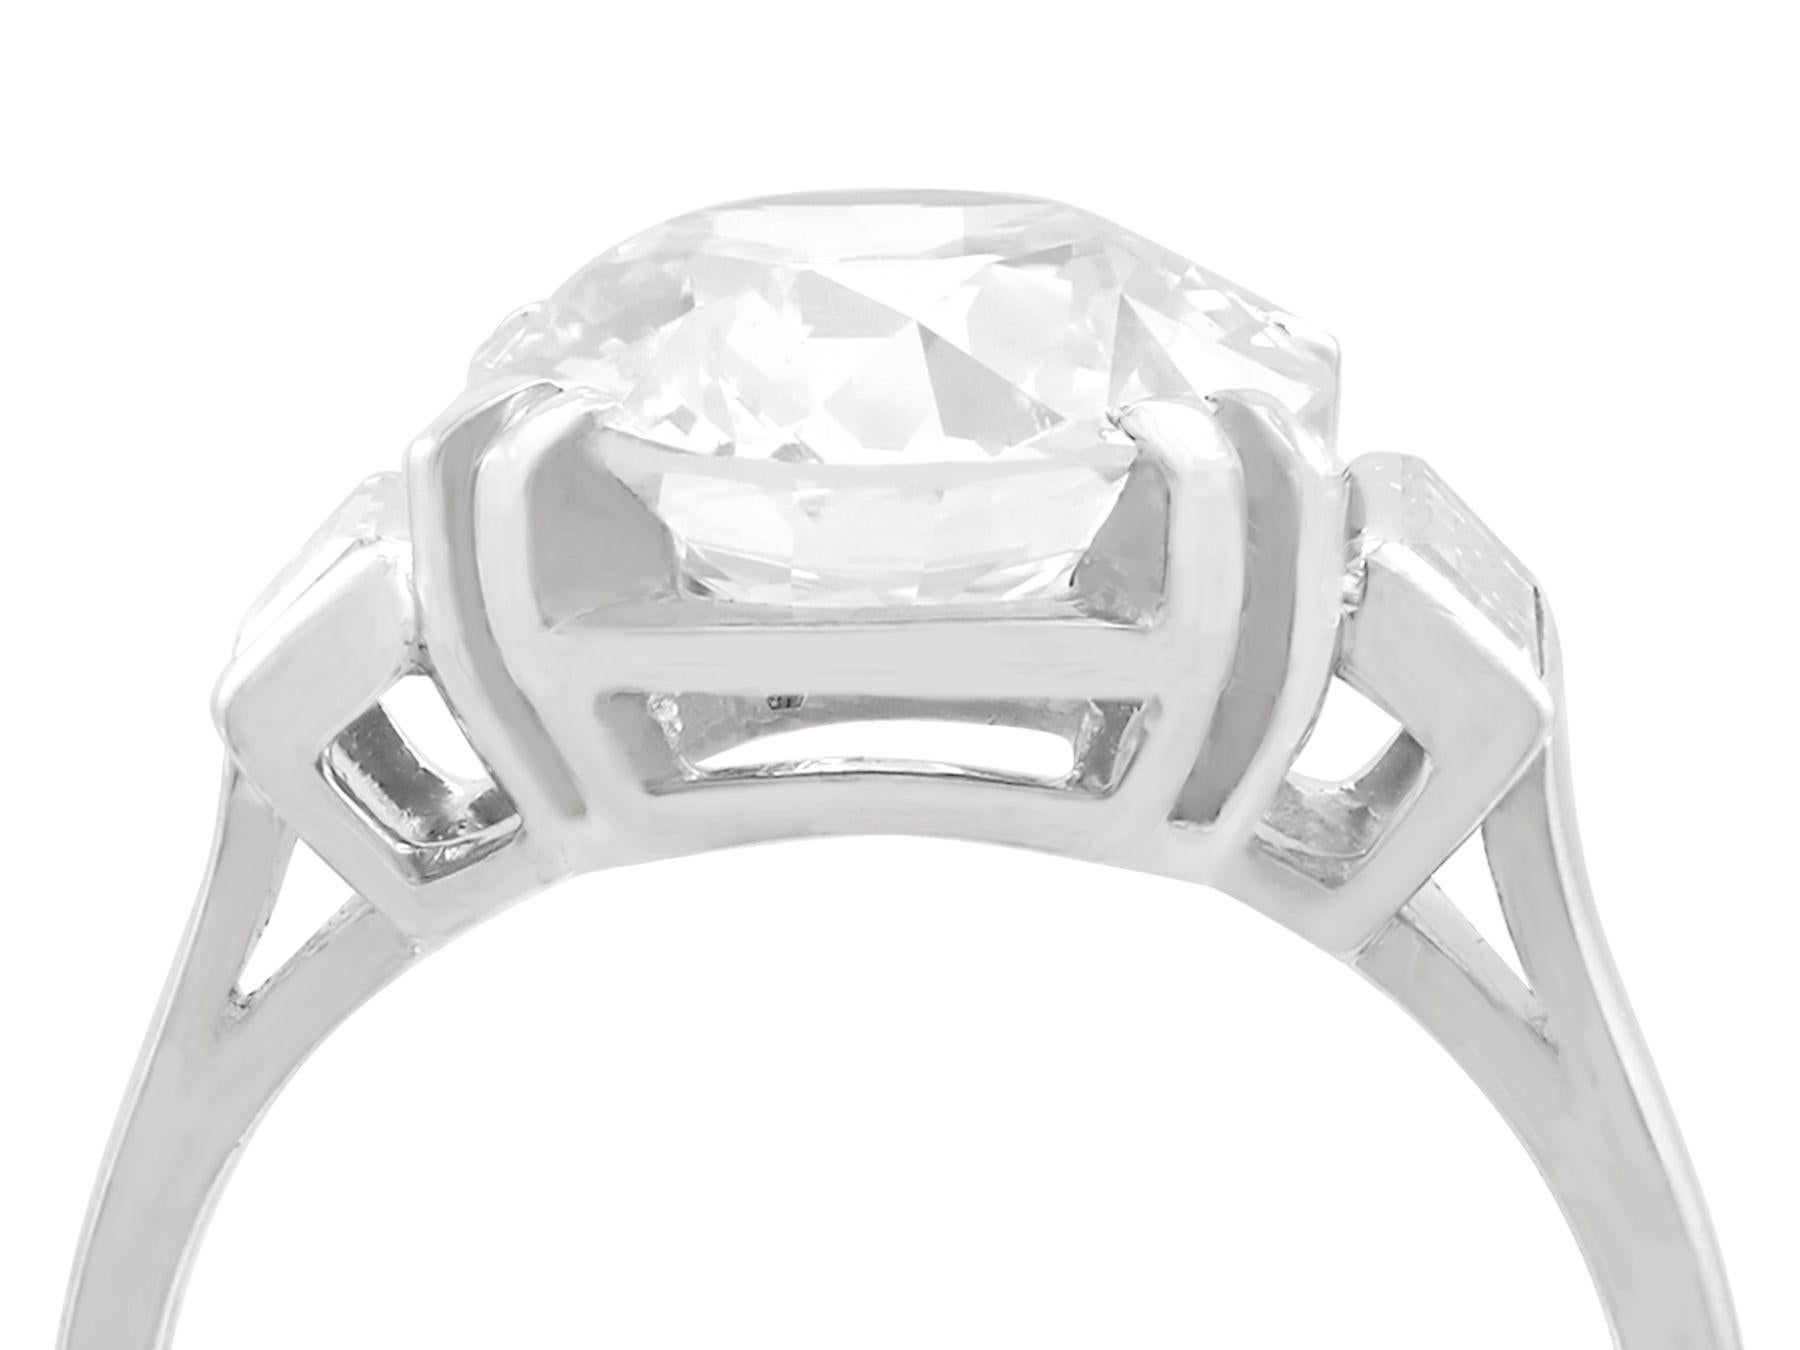 A stunning antique and vintage 3.41 carat diamond and platinum cocktail ring; part of our diverse diamond jewelry and estate jewelry collections.

This stunning, fine and impressive old cut diamond ring has been crafted in platinum.

The pierced